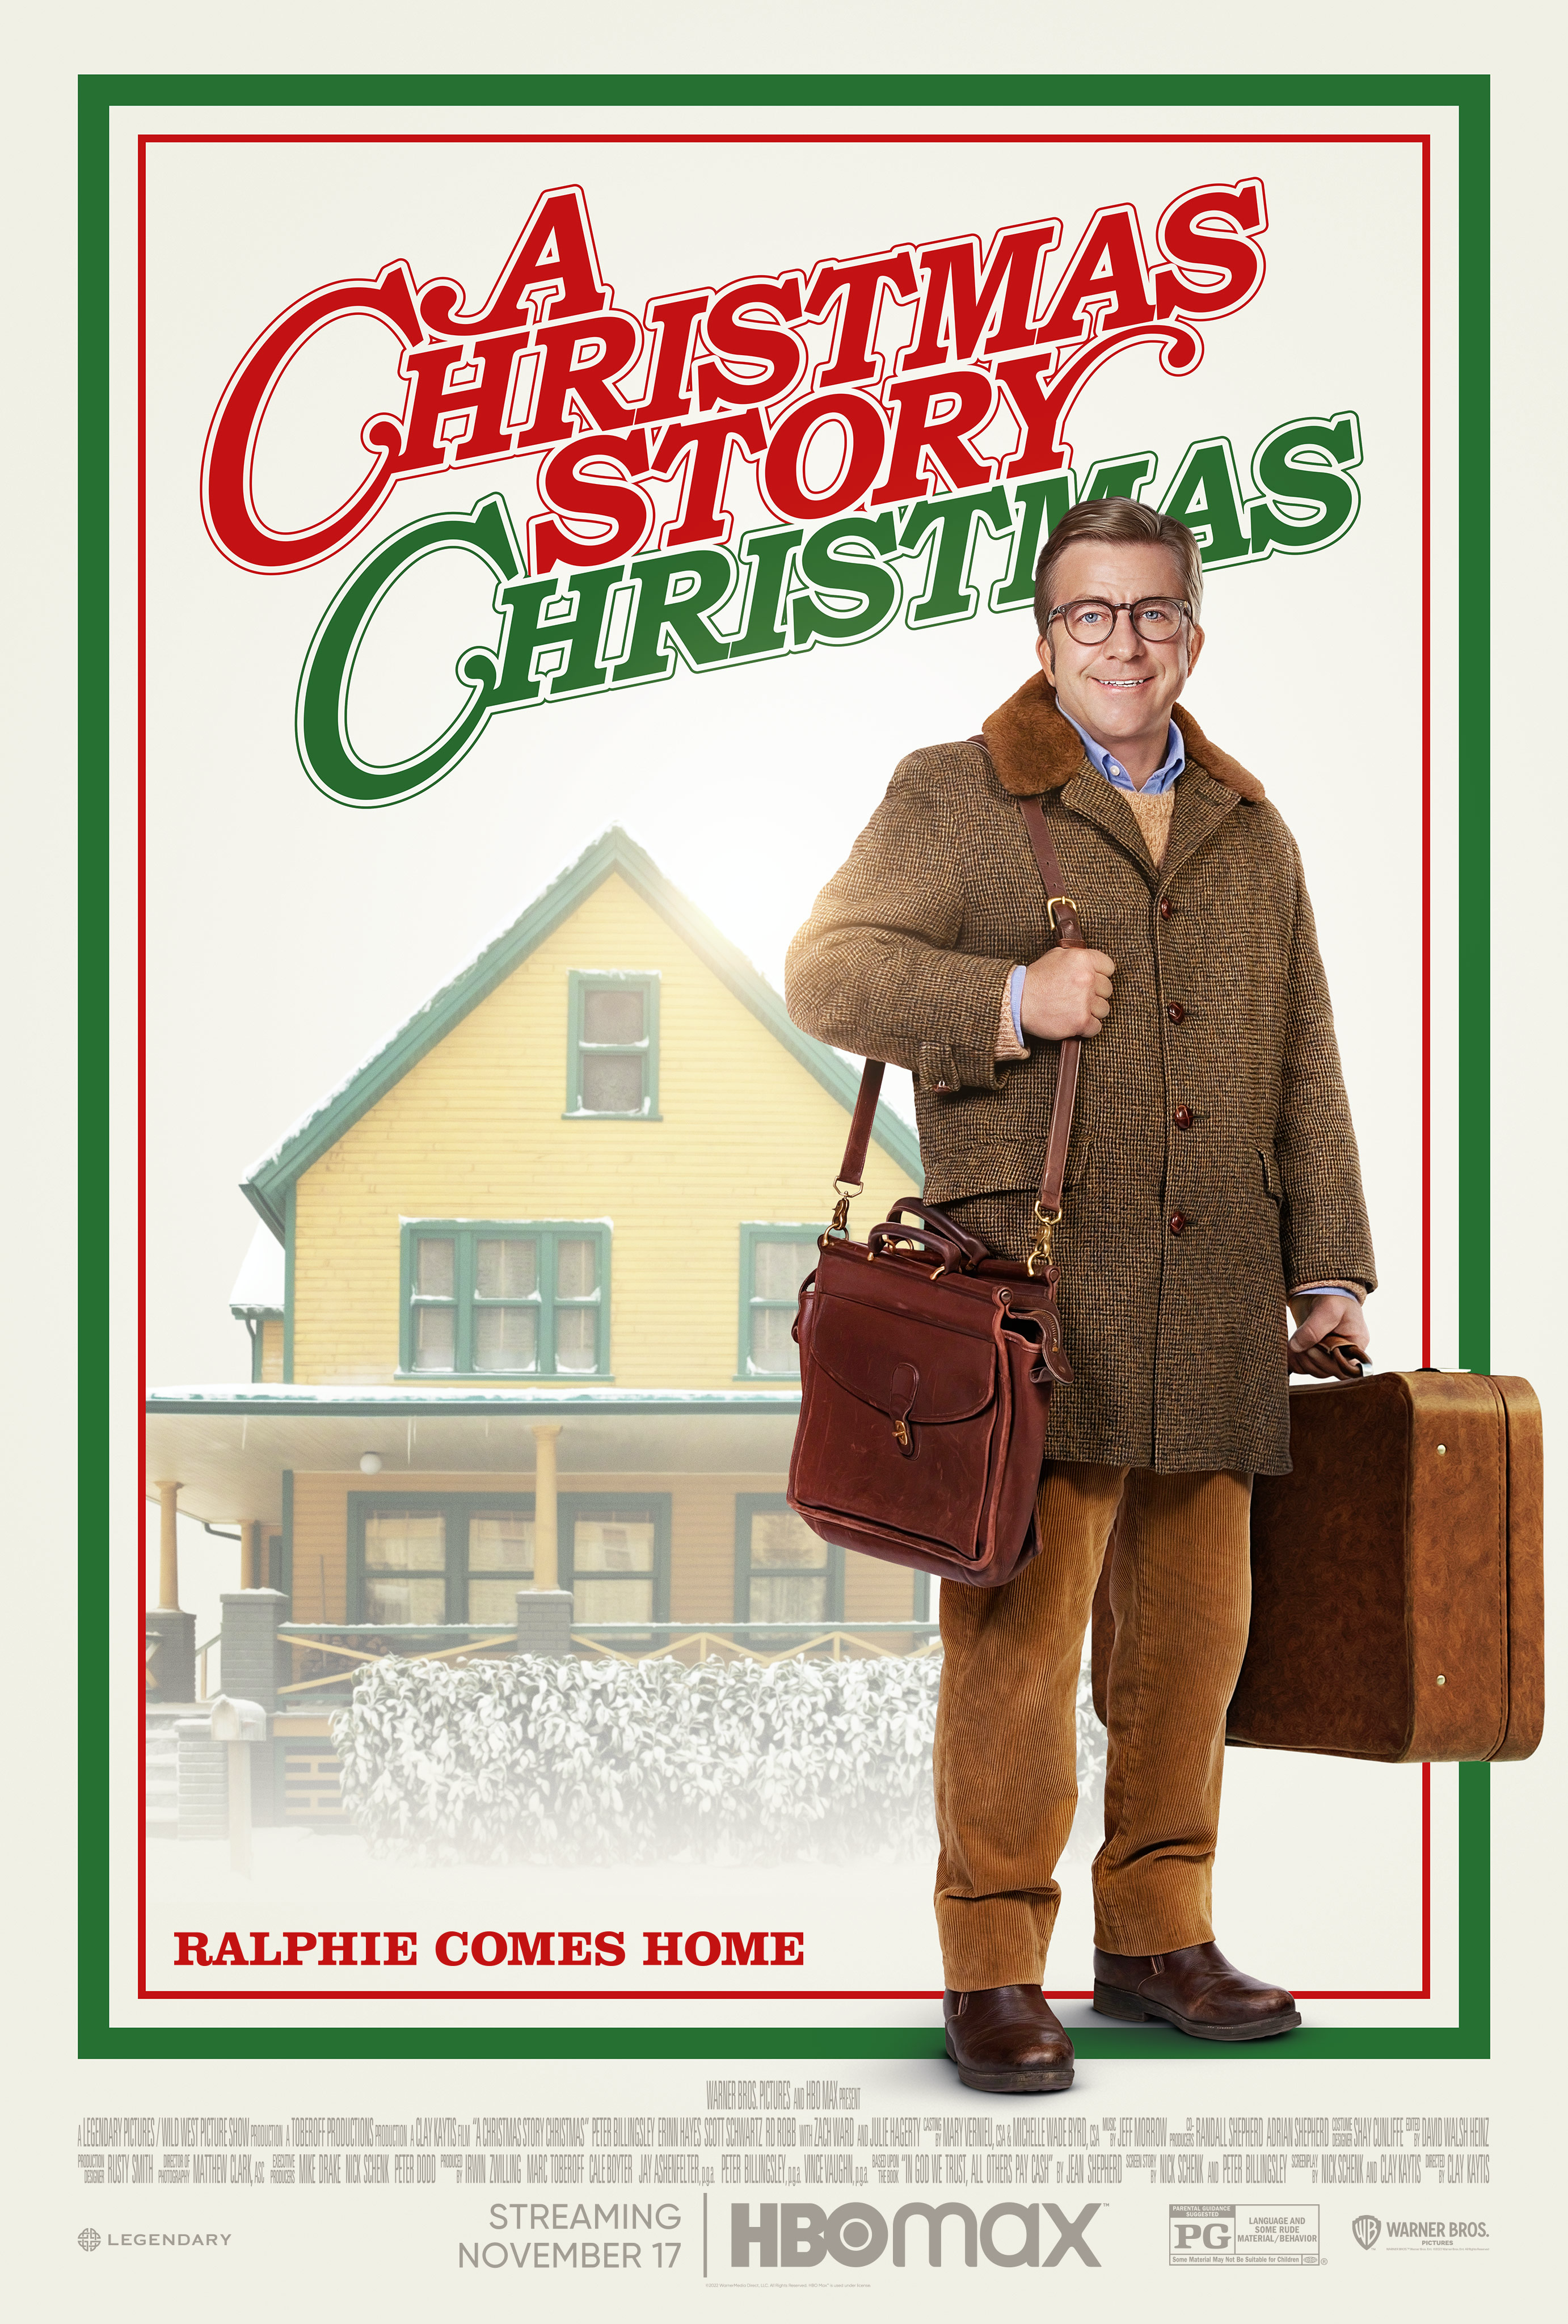 A Christmas Story Christmas Trailer Previews Search for a Magical Holiday 